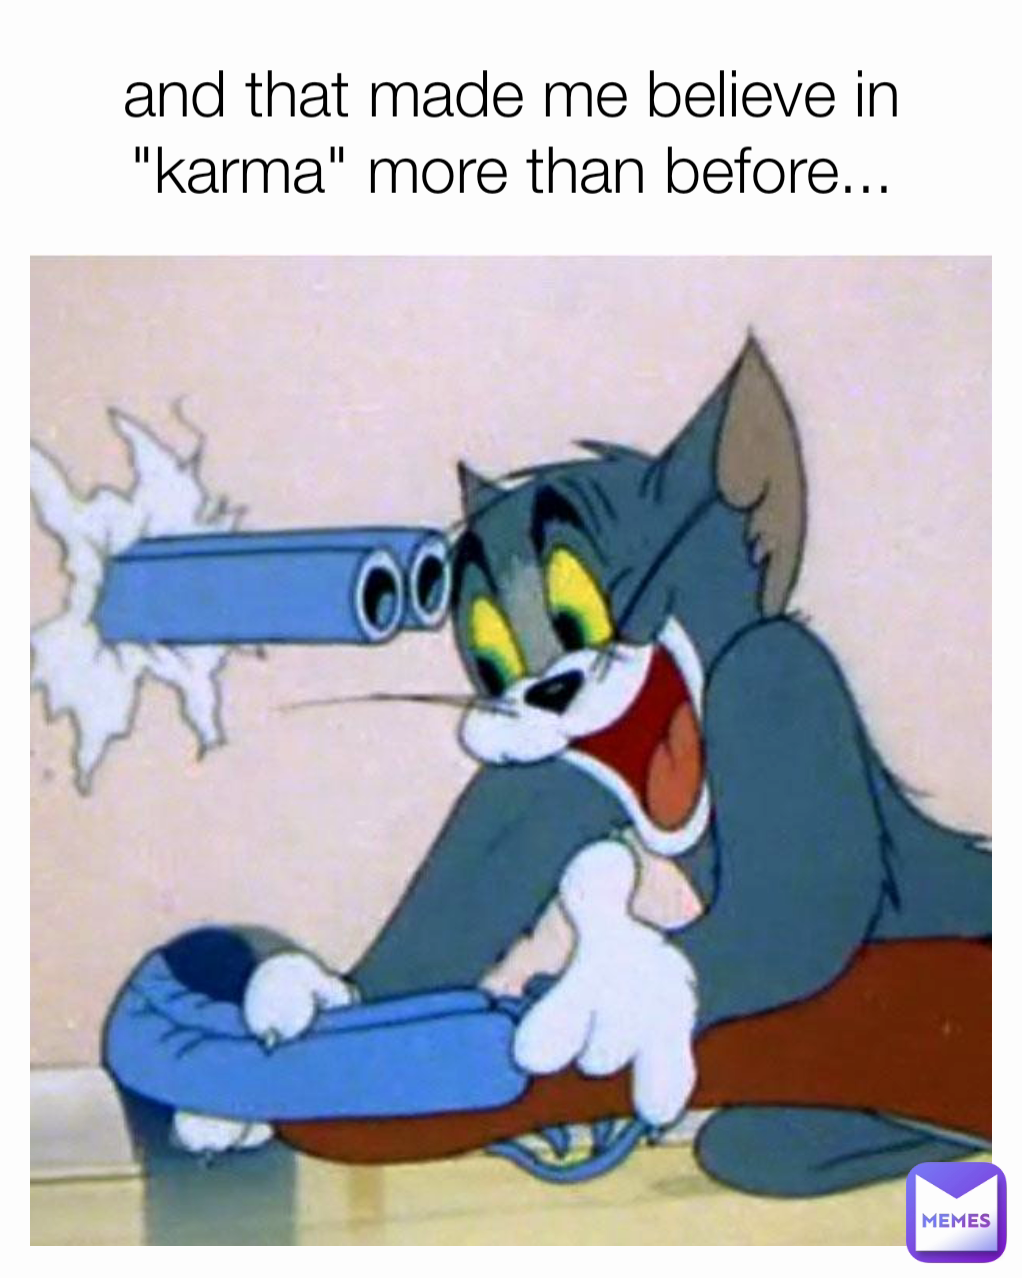 and that made me believe in "karma" more than before...